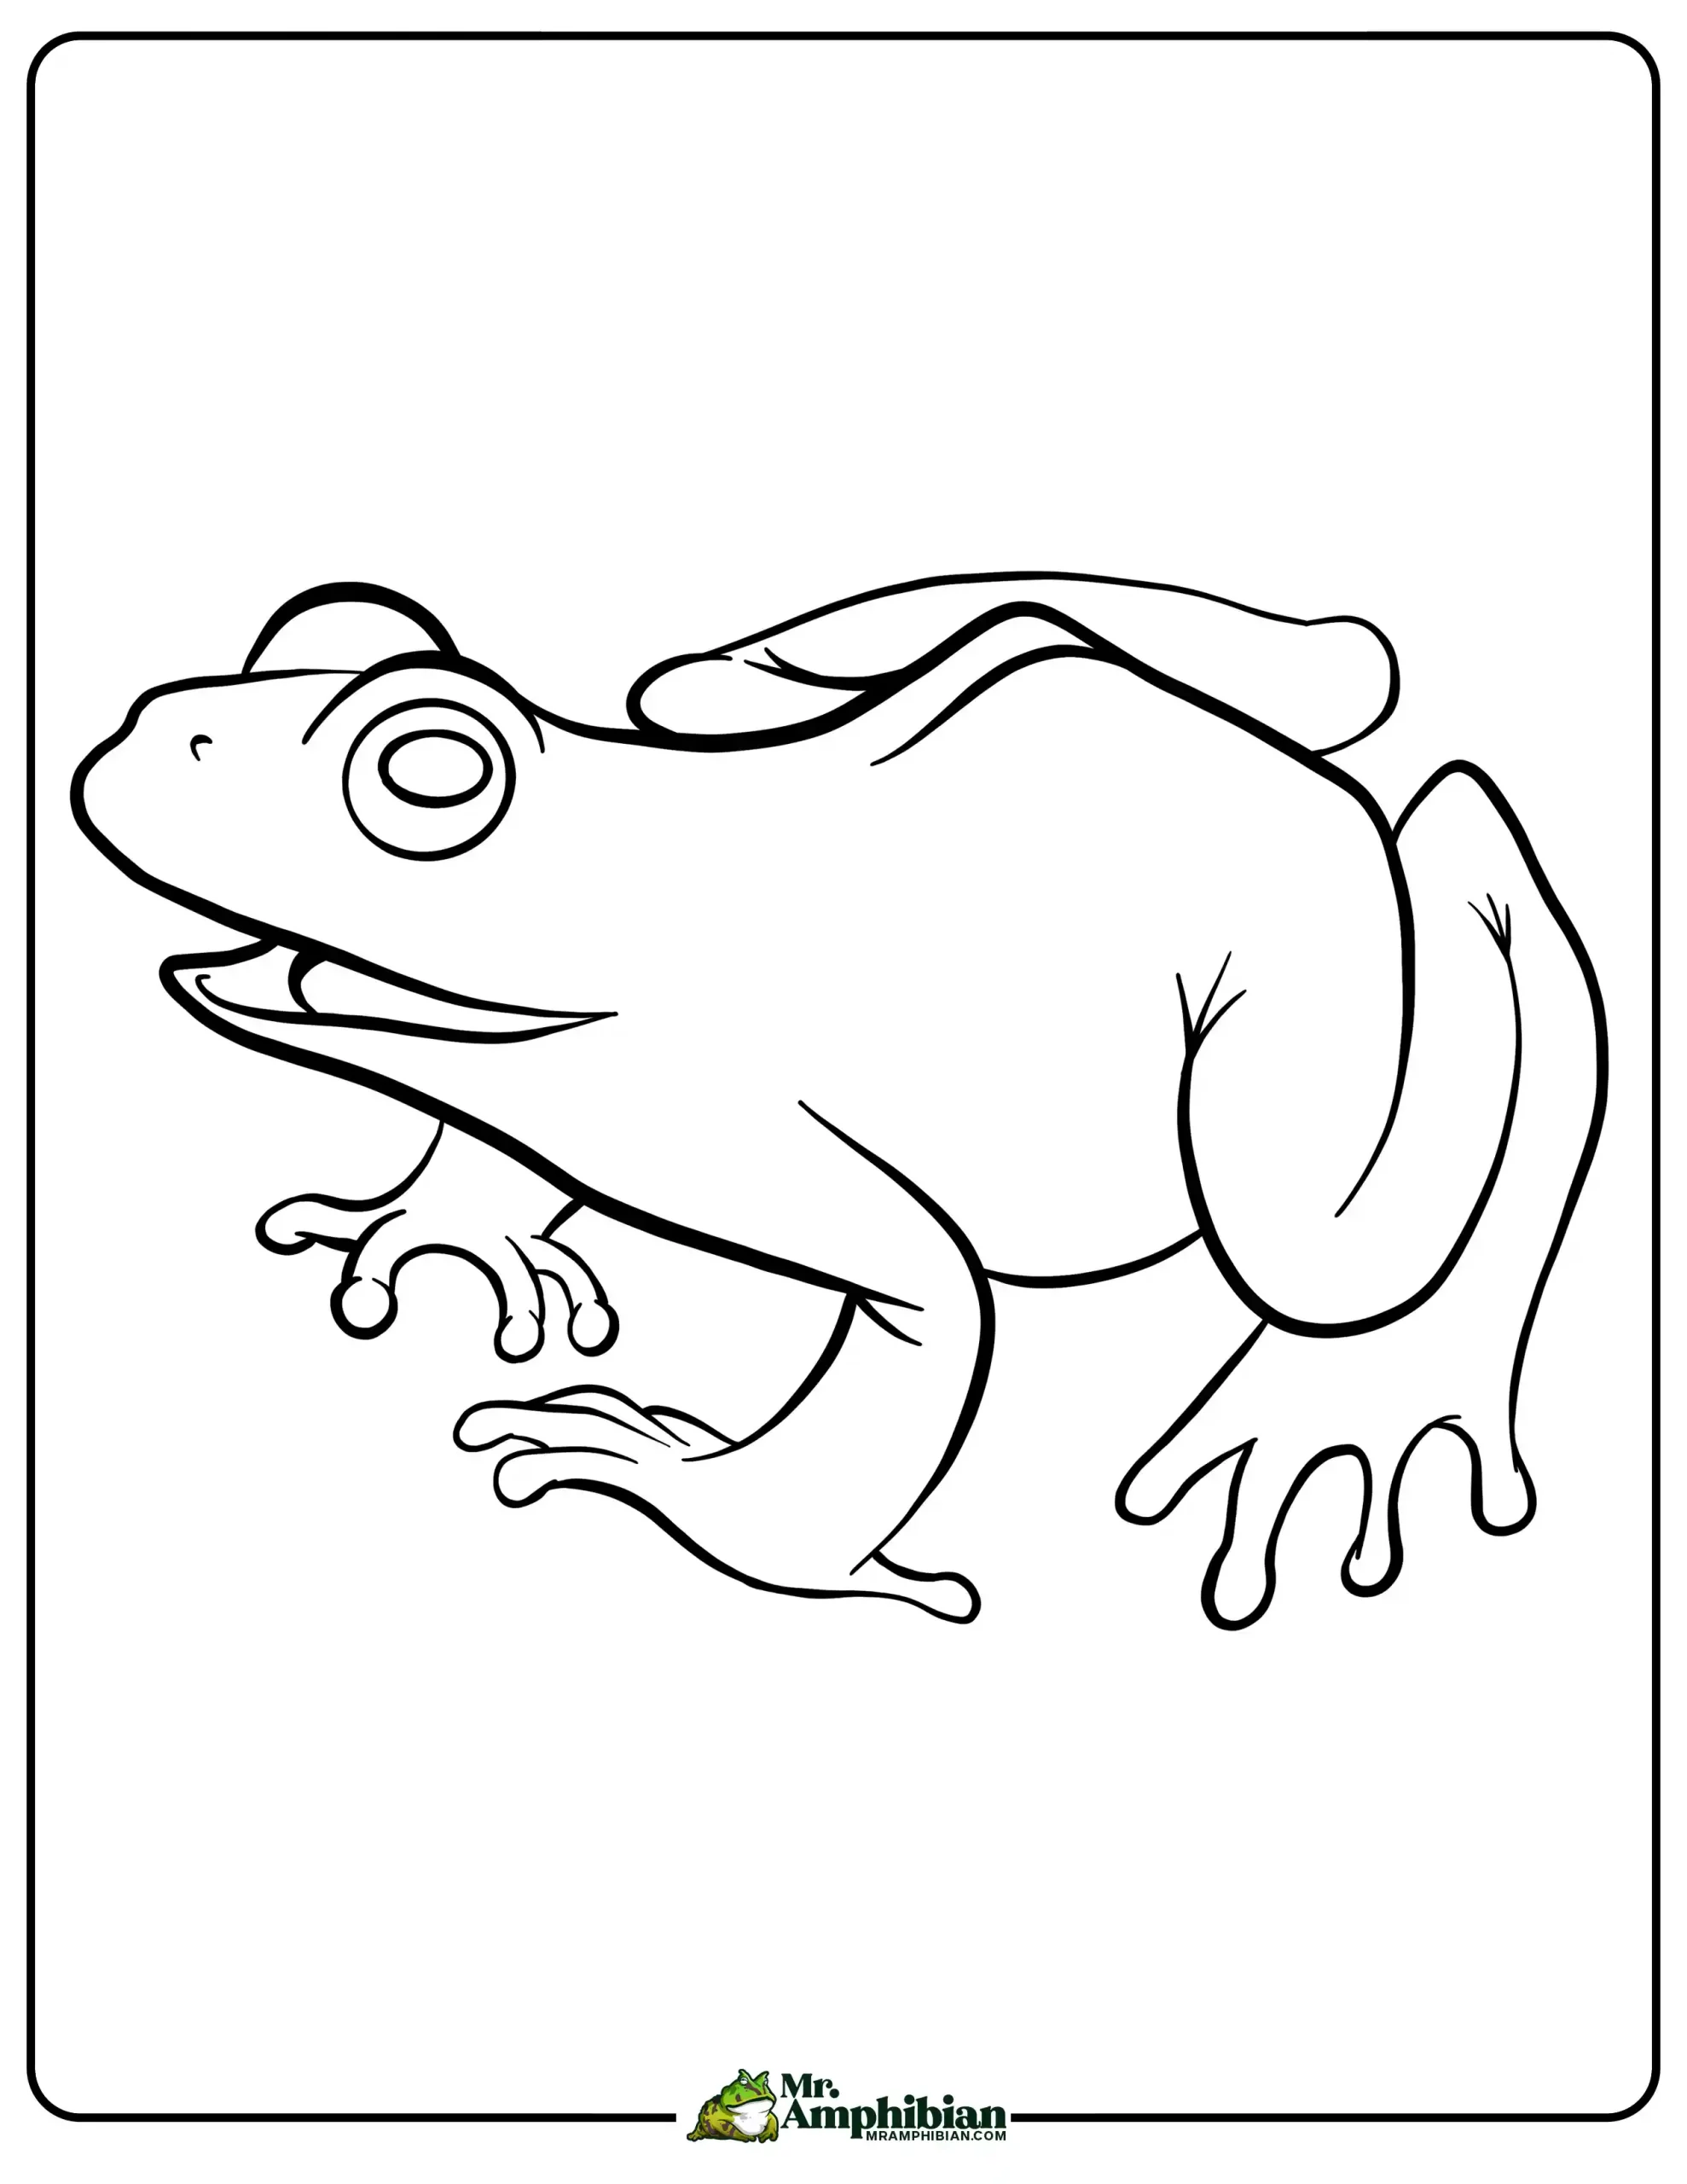 Frog Coloring Page 02